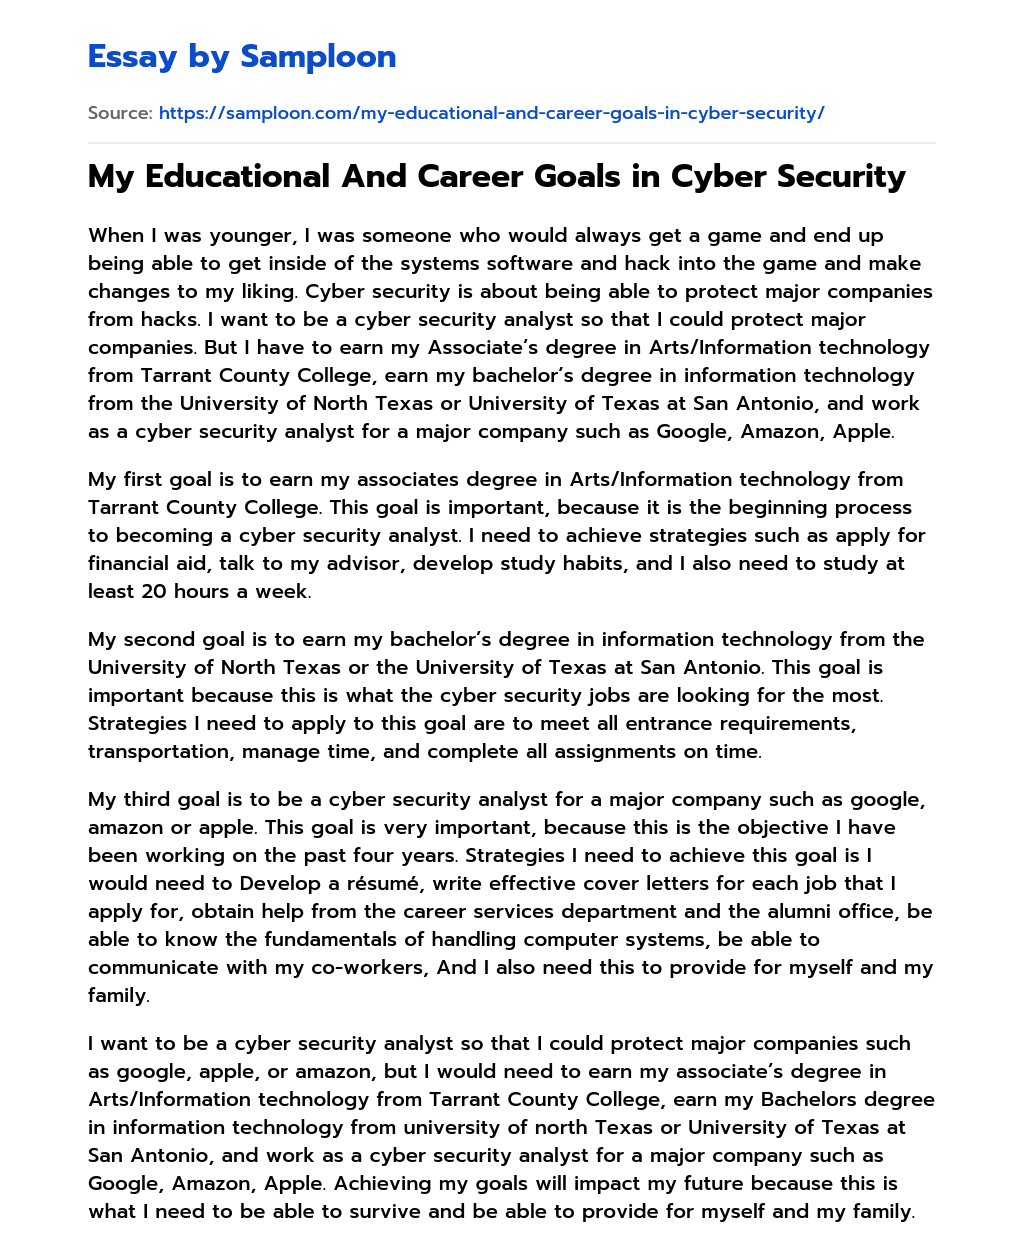 My Educational And Career Goals in Cyber Security essay